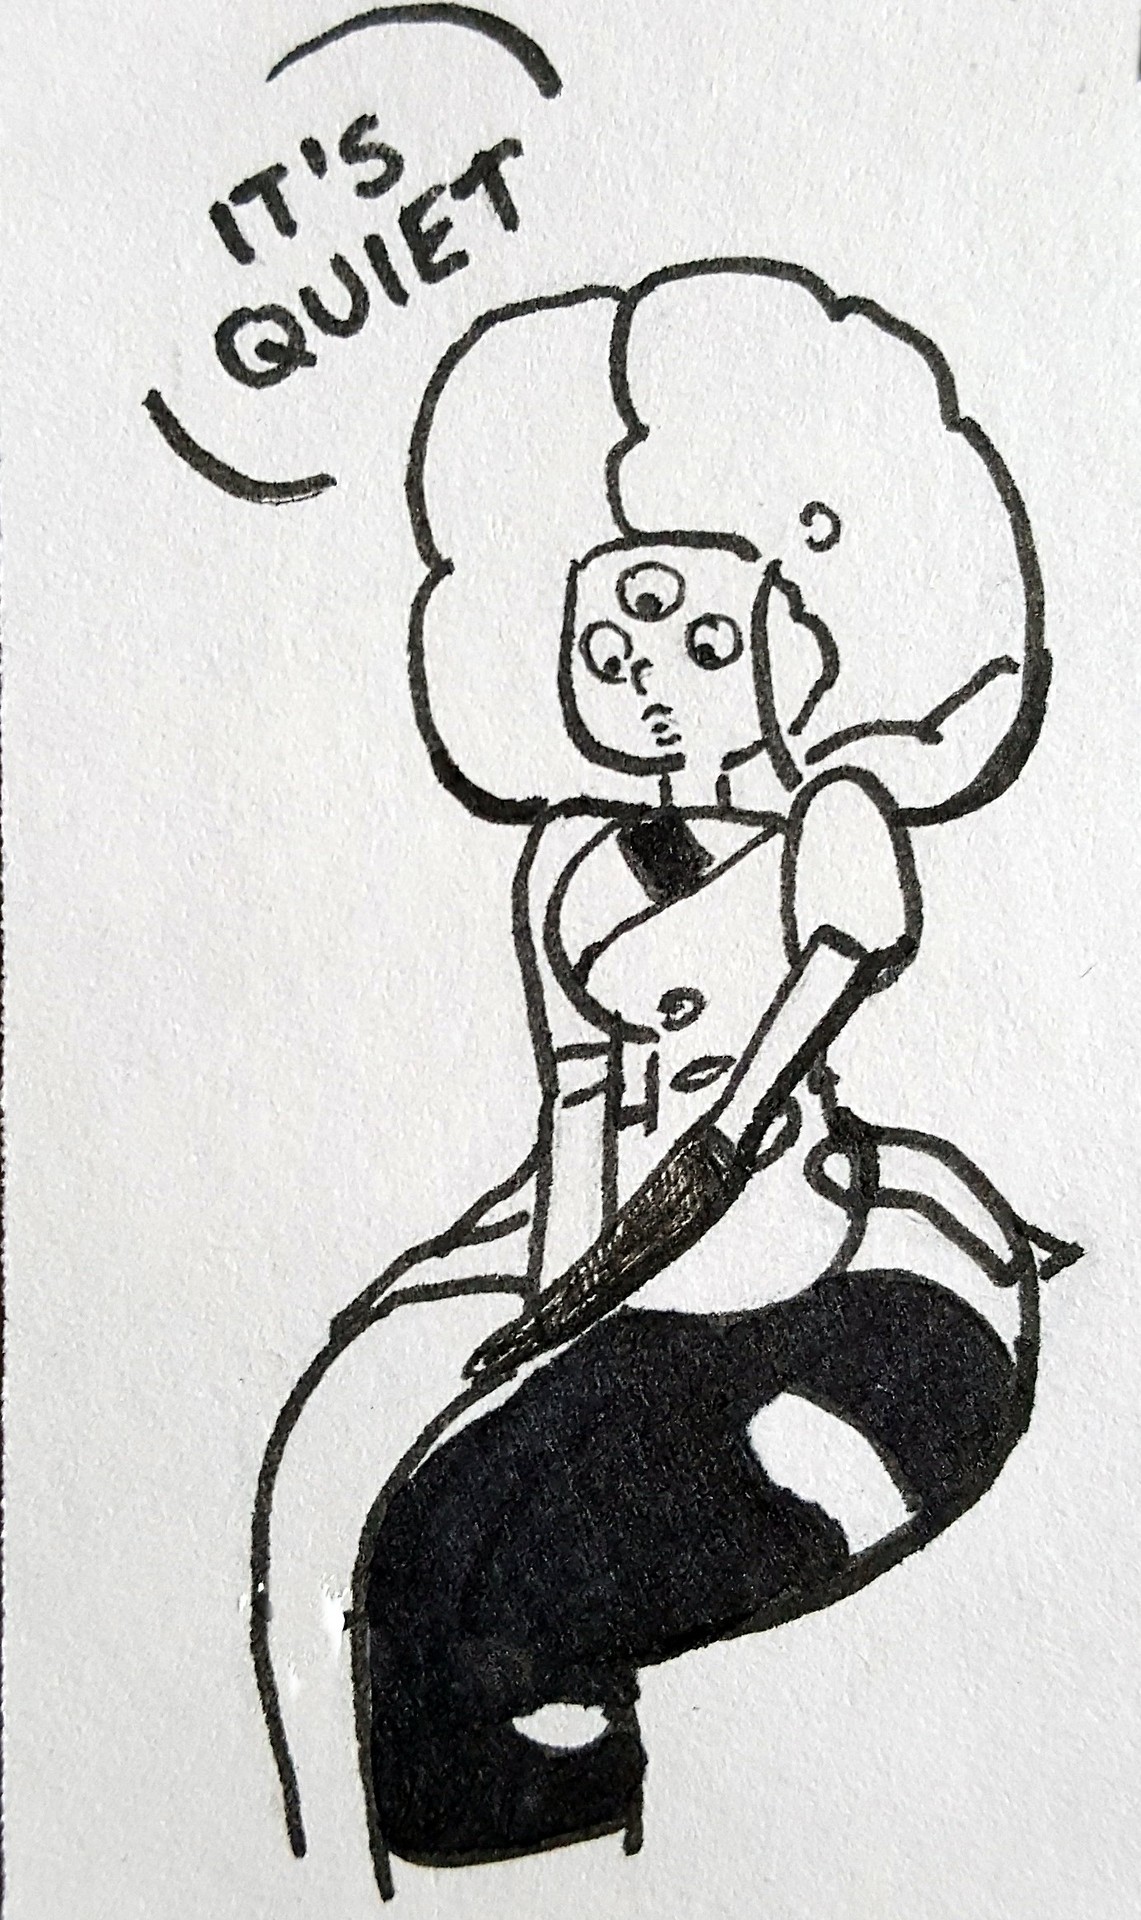 Baby Garnet Sketch DumpI have a fan comic planned that takes place shortly after Garnet is first formed, but I wasn’t very familiar with that form (especially drawing her without the visor!) and...